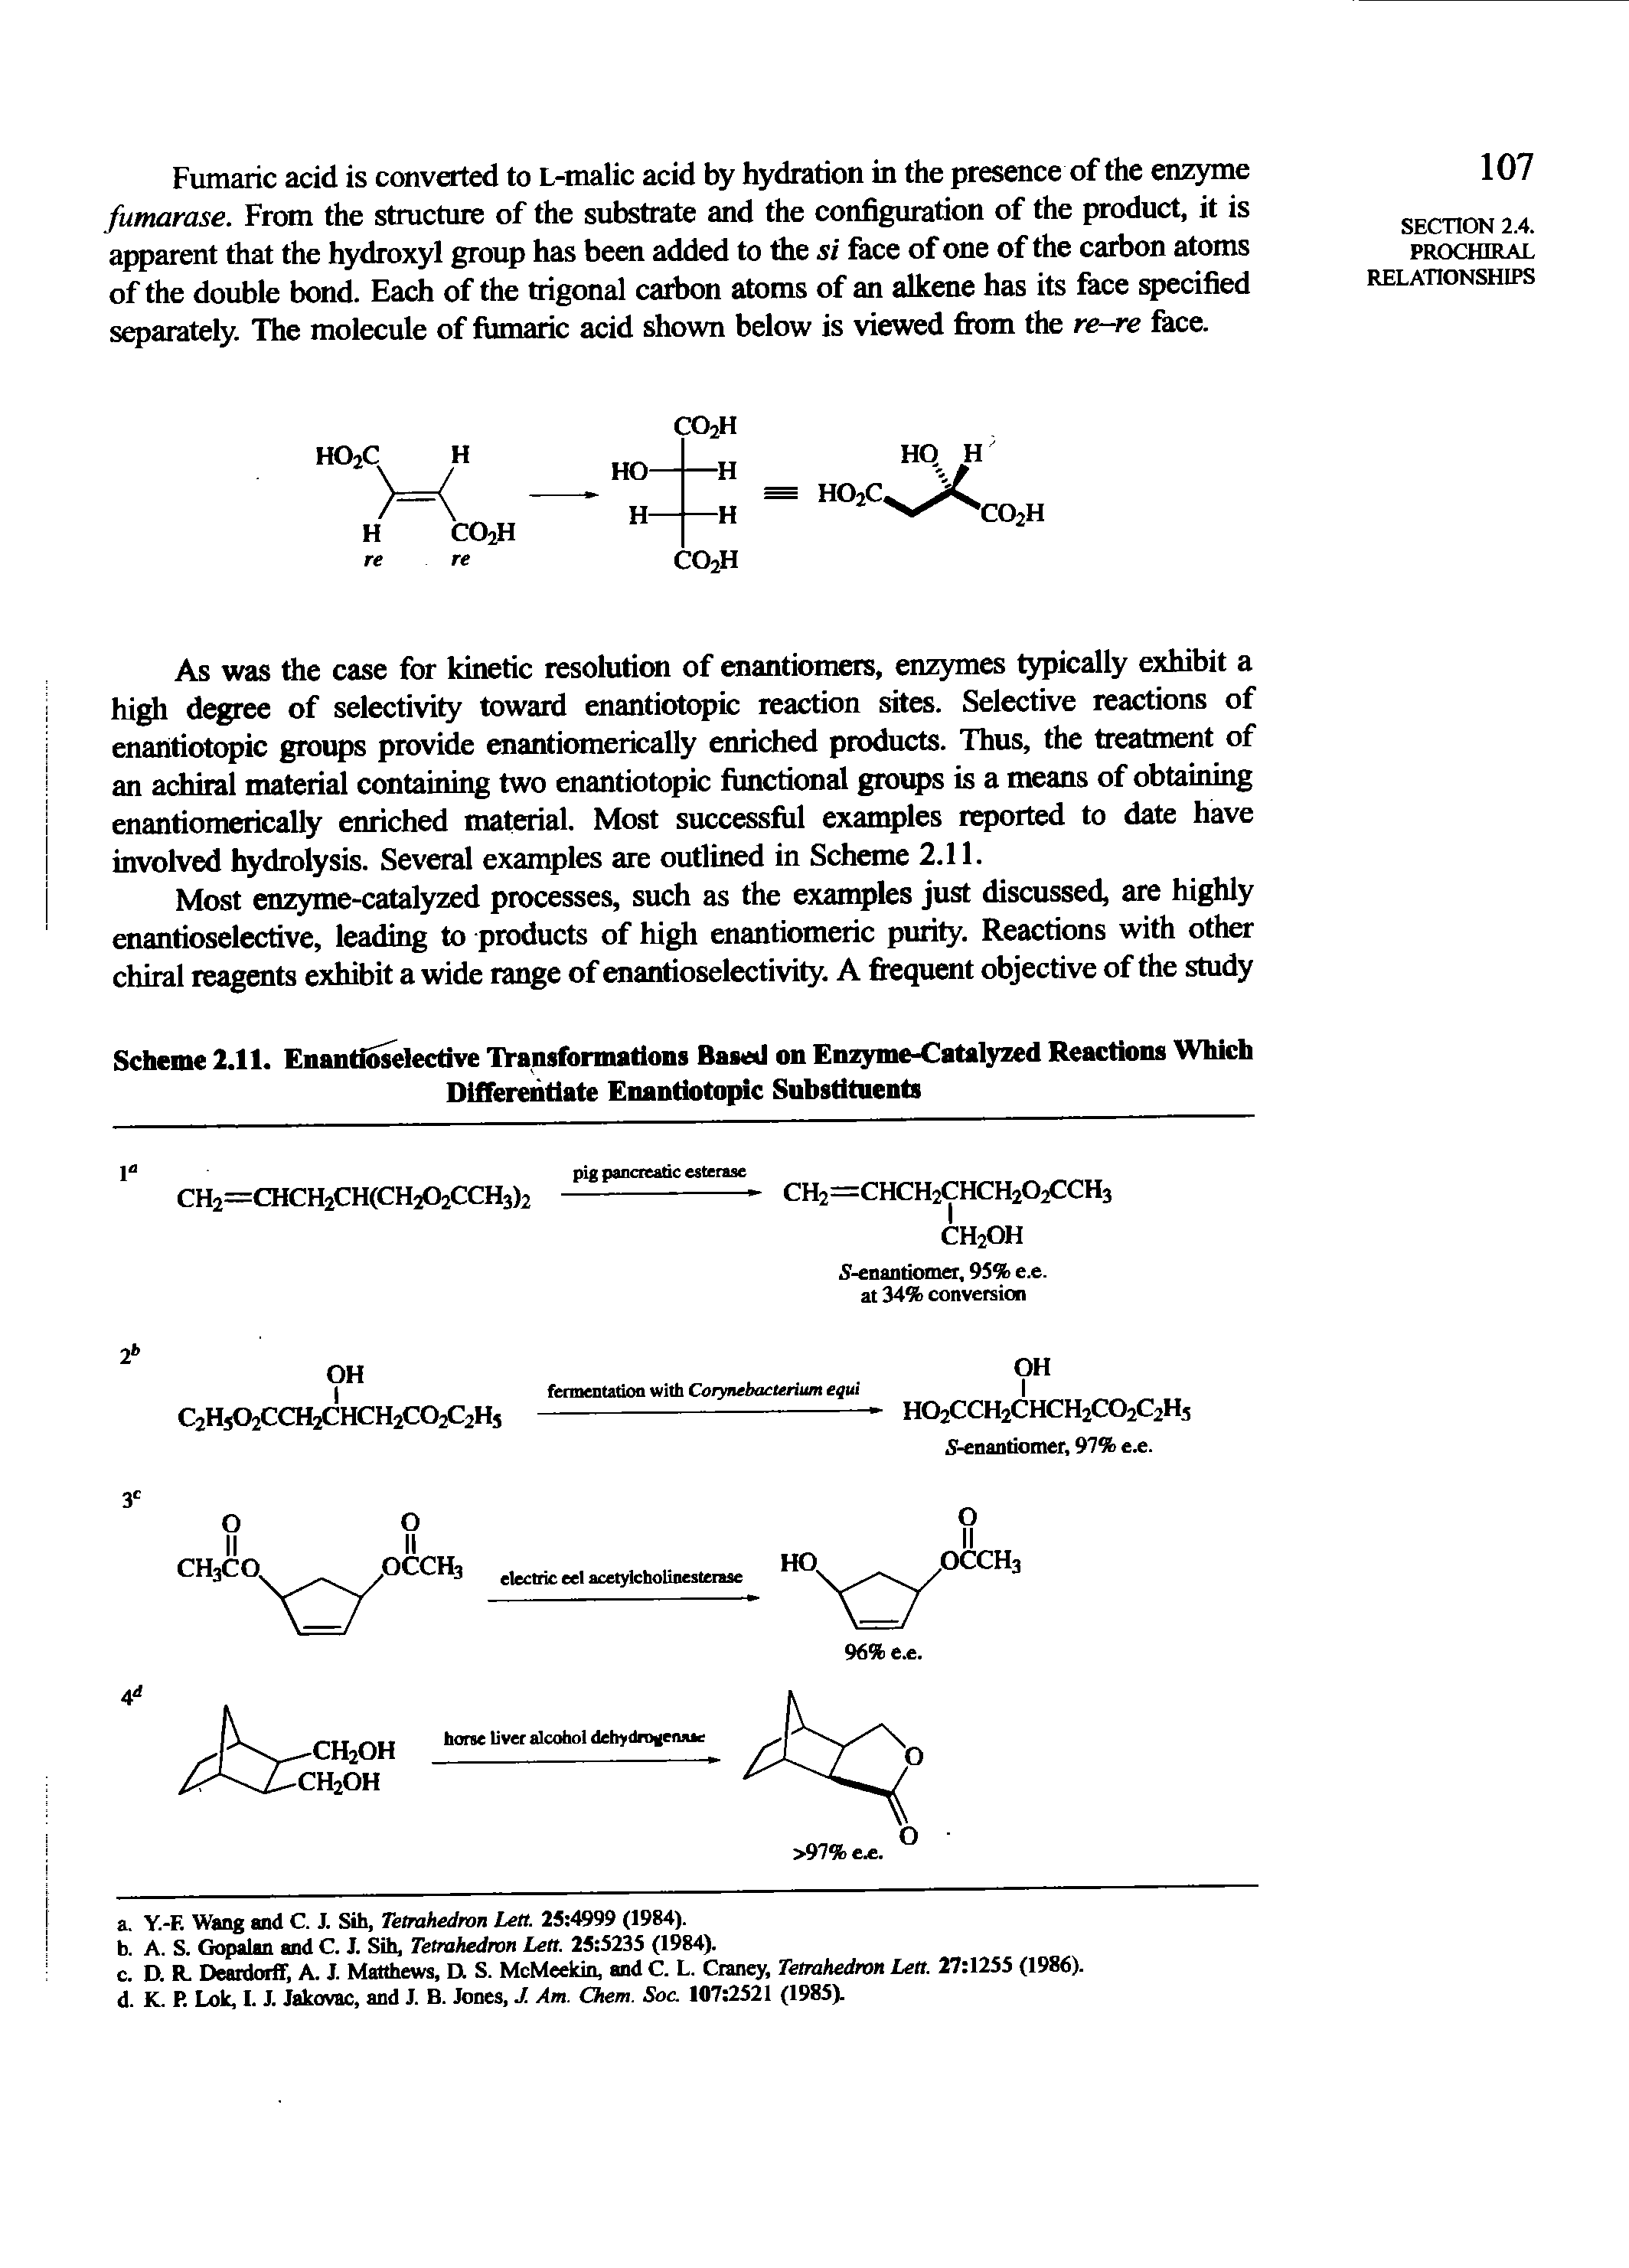 Scheme 2.11. Enantioselective lyansfomiatlons Based on Enzyme-Catalyzed Reactions Which Differentiate Enantiotopic Substituents...